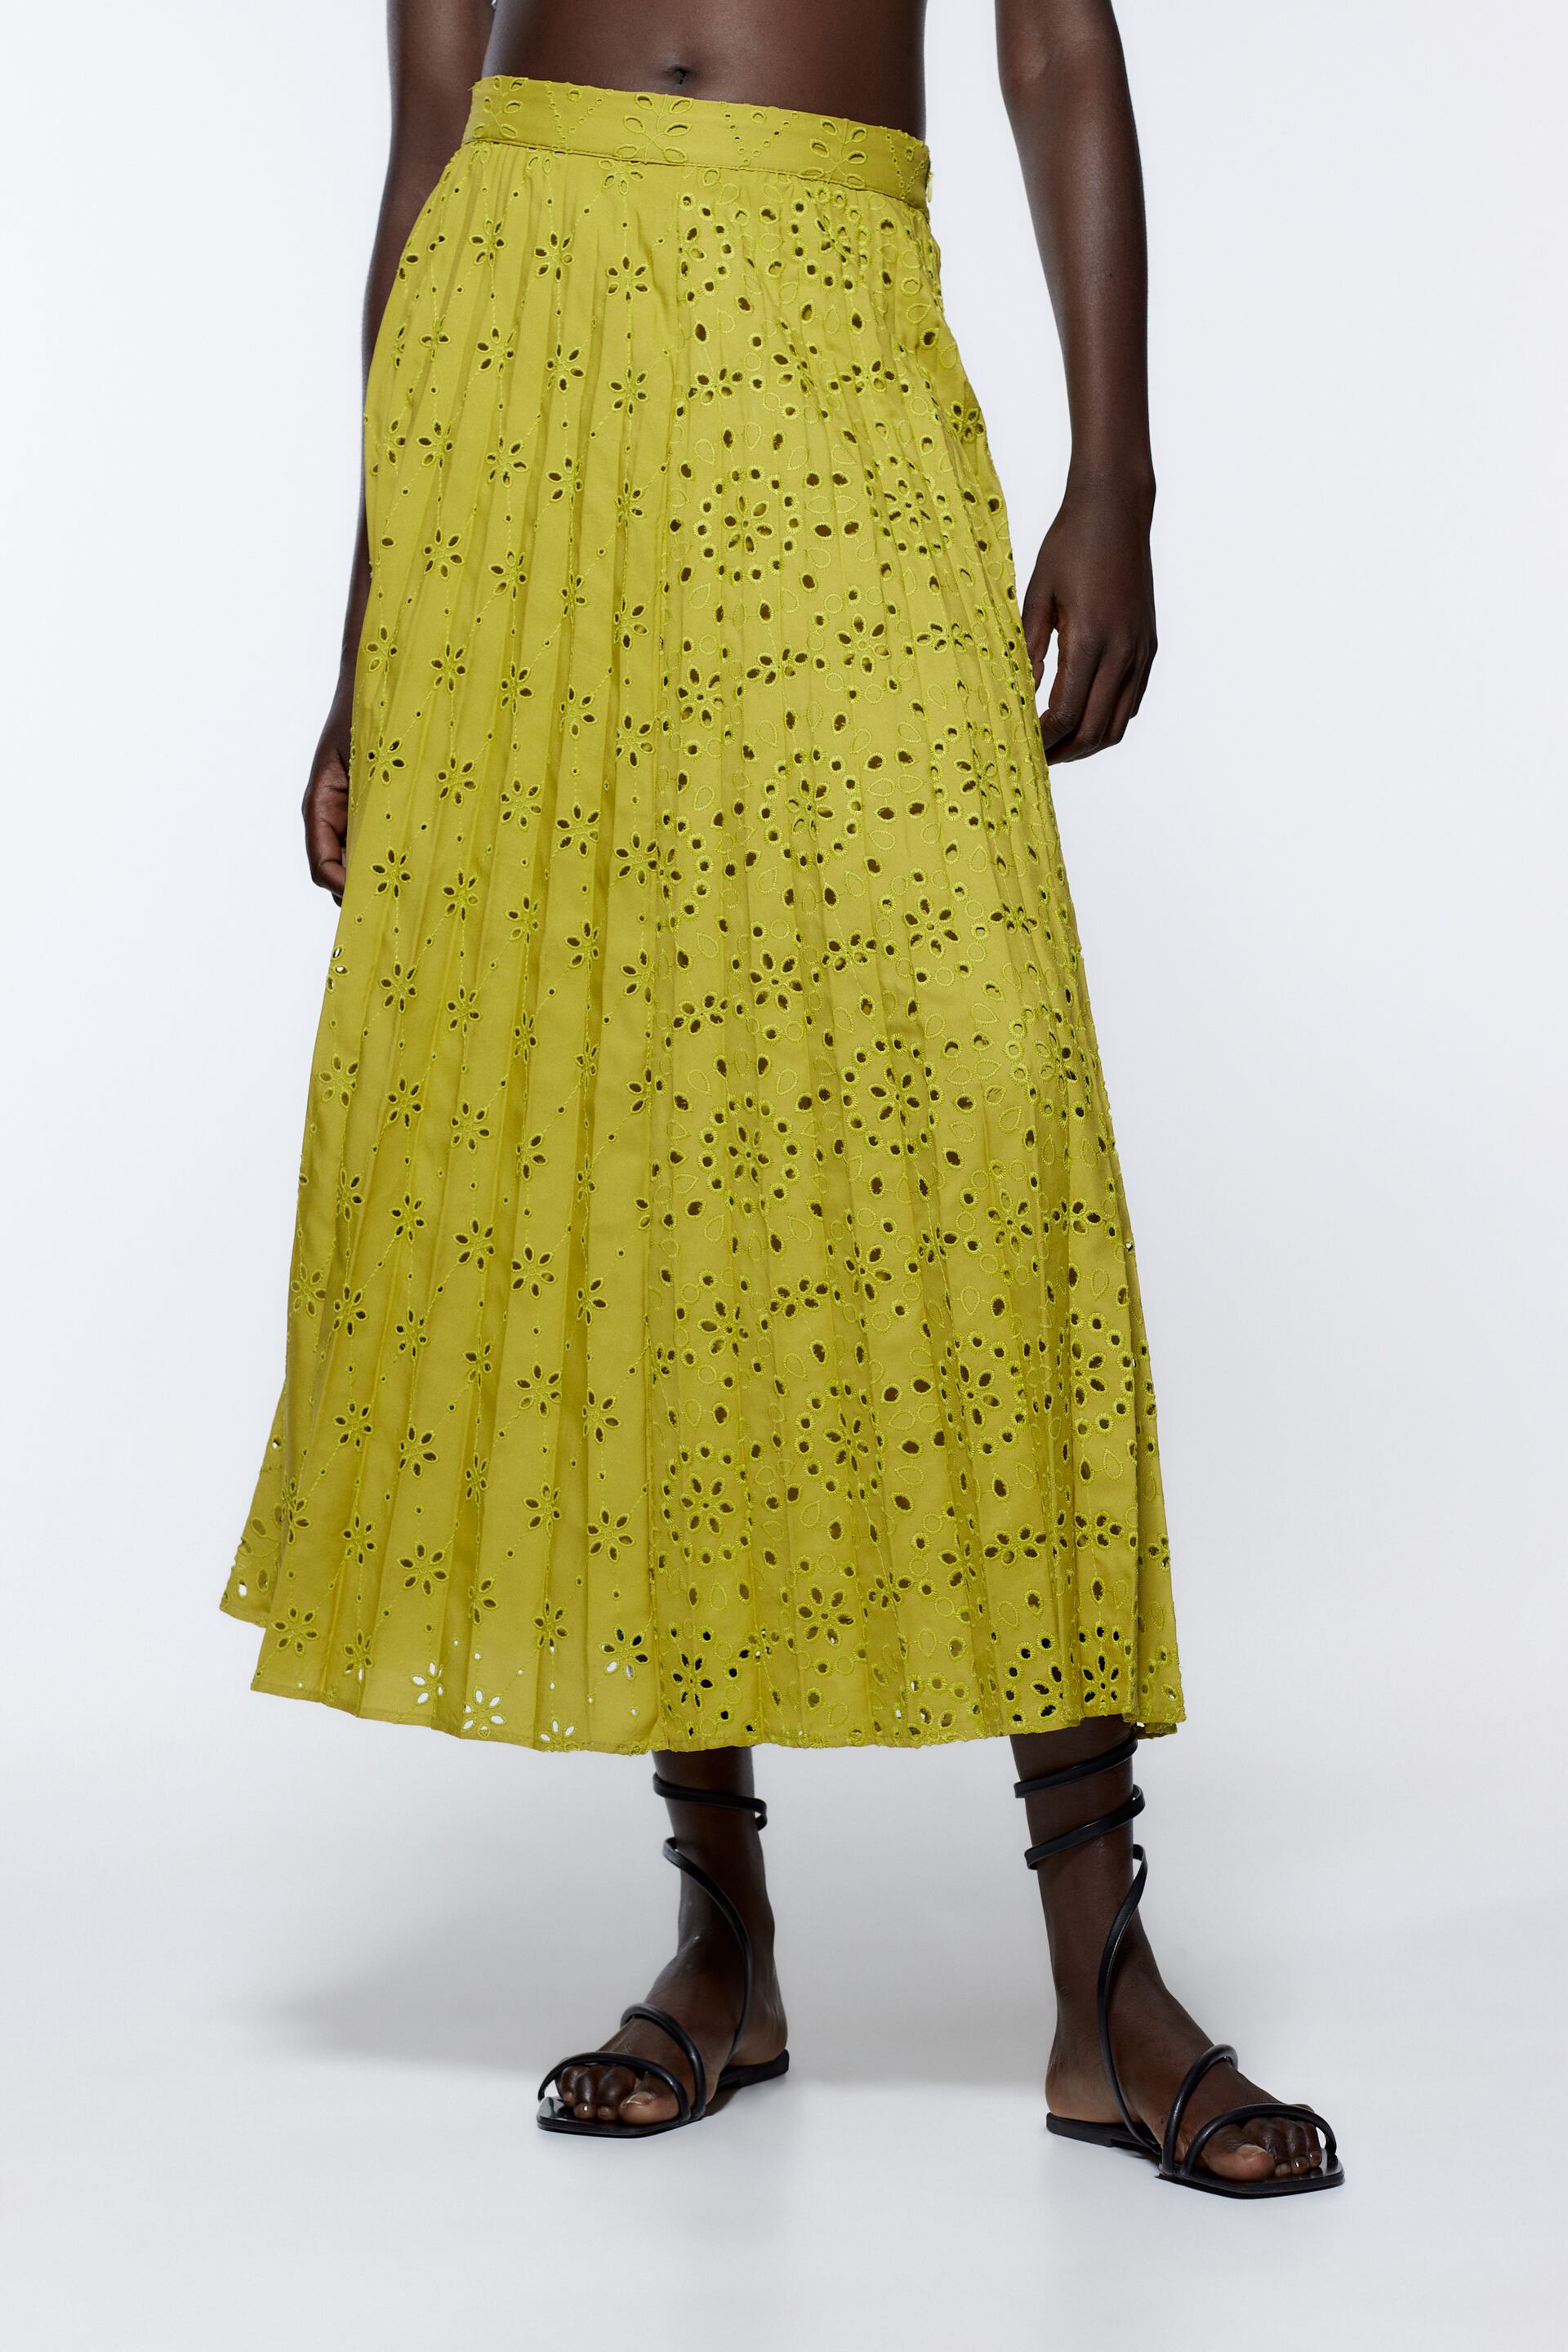 NWT ZARA GREEN MIDI SKIRT WITH FLORAL EMBROIDERY 0881/251